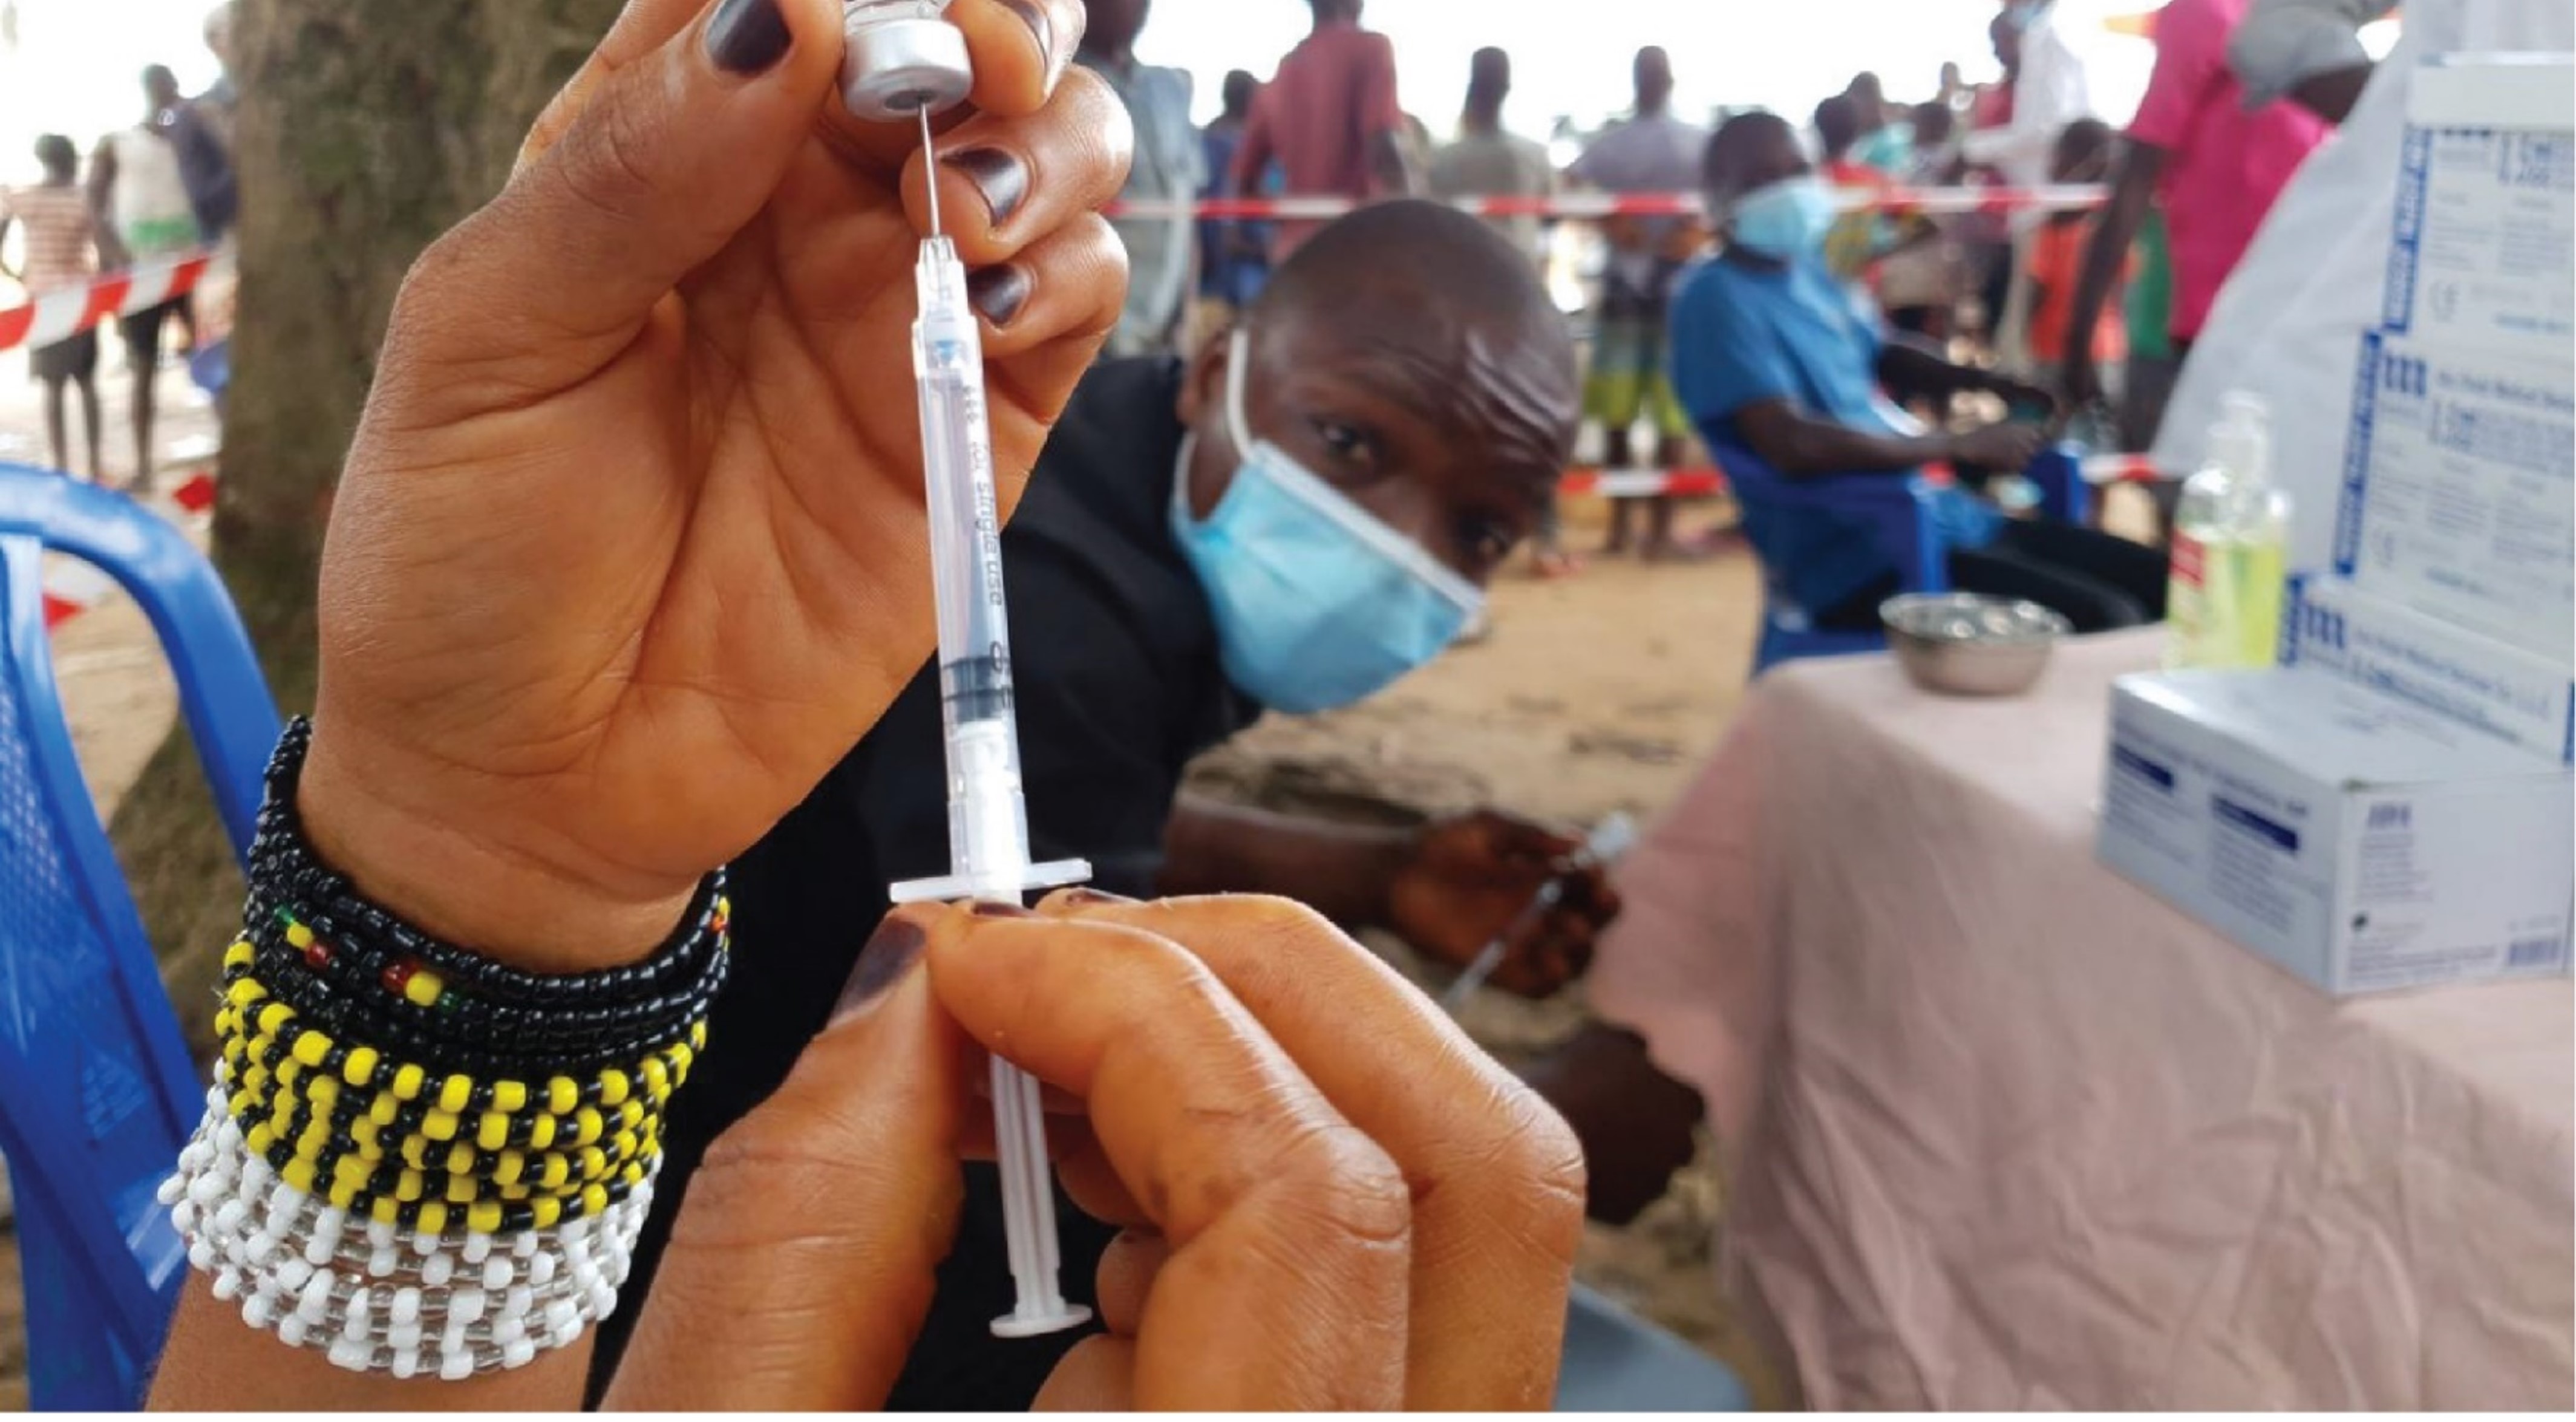 Preparing a shot with MenAfriVac Vaccine (Credit: WHO/AFRO)